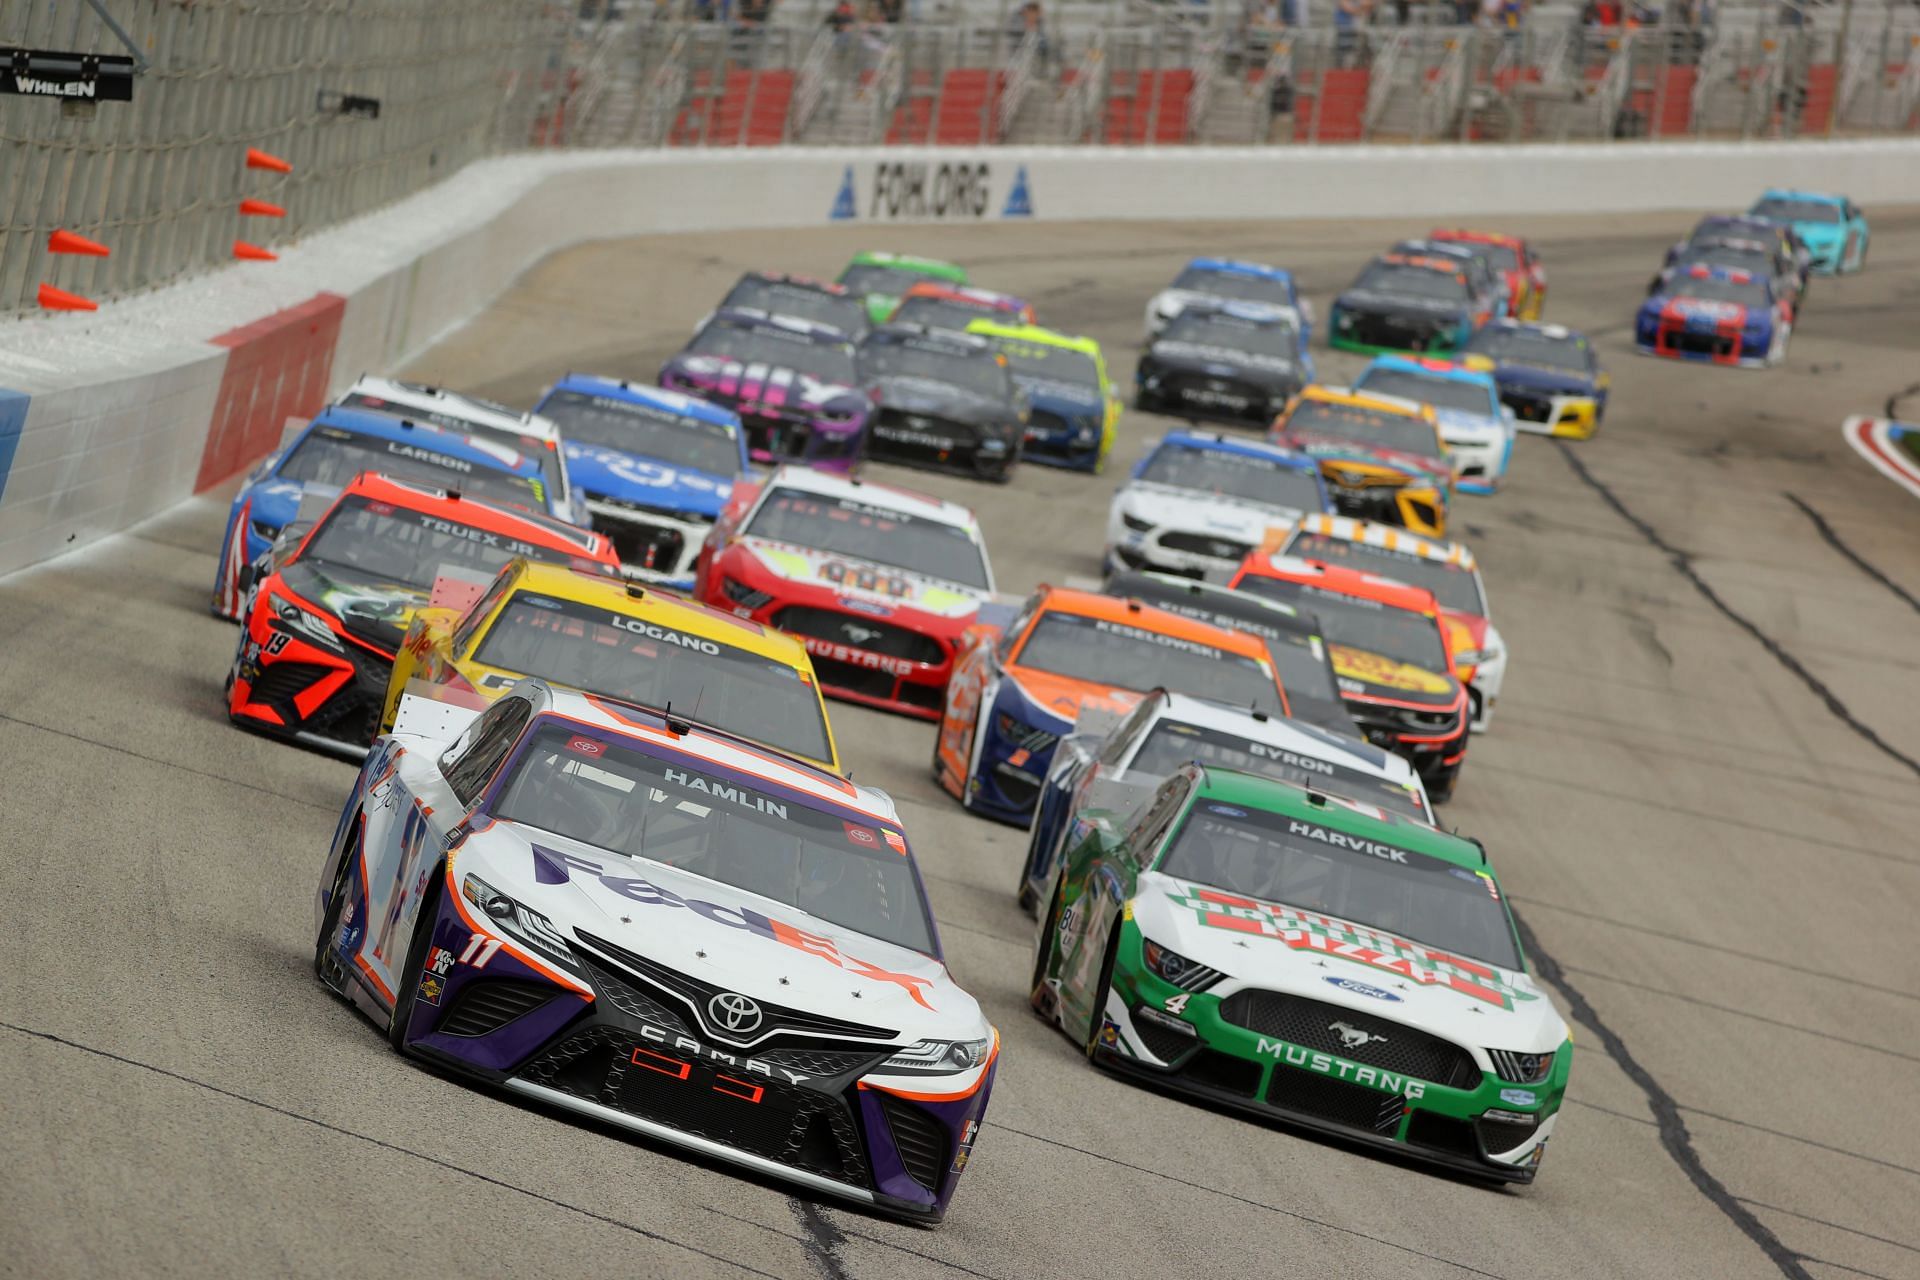 Denny Hamlin and Kevin Harvick lead the field during the 2021 NASCAR Cup Series Folds of Honor QuikTrip 500 at Atlanta Motor Speedway in Hampton, Georgia (Photo by Kevin C. Cox/Getty Images)